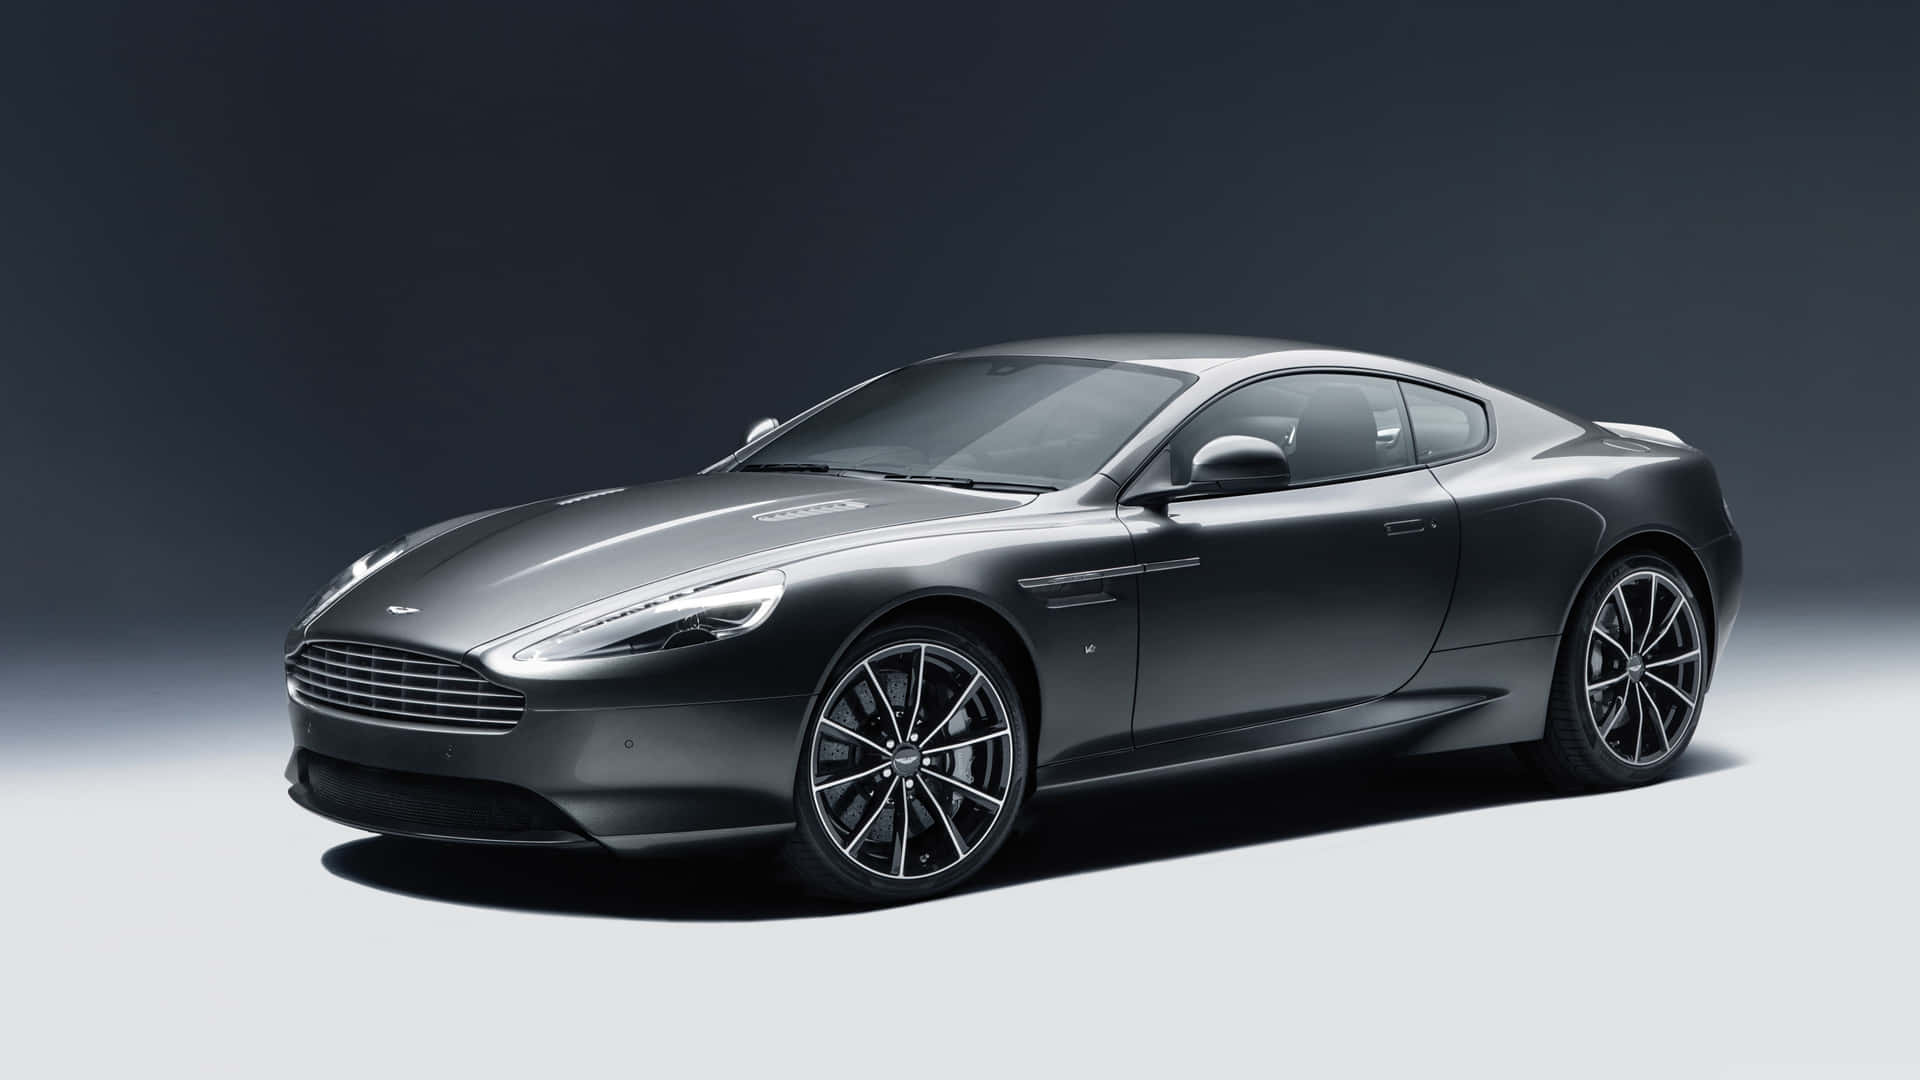 Get ready for the ultimate luxury car ride with Aston Martin